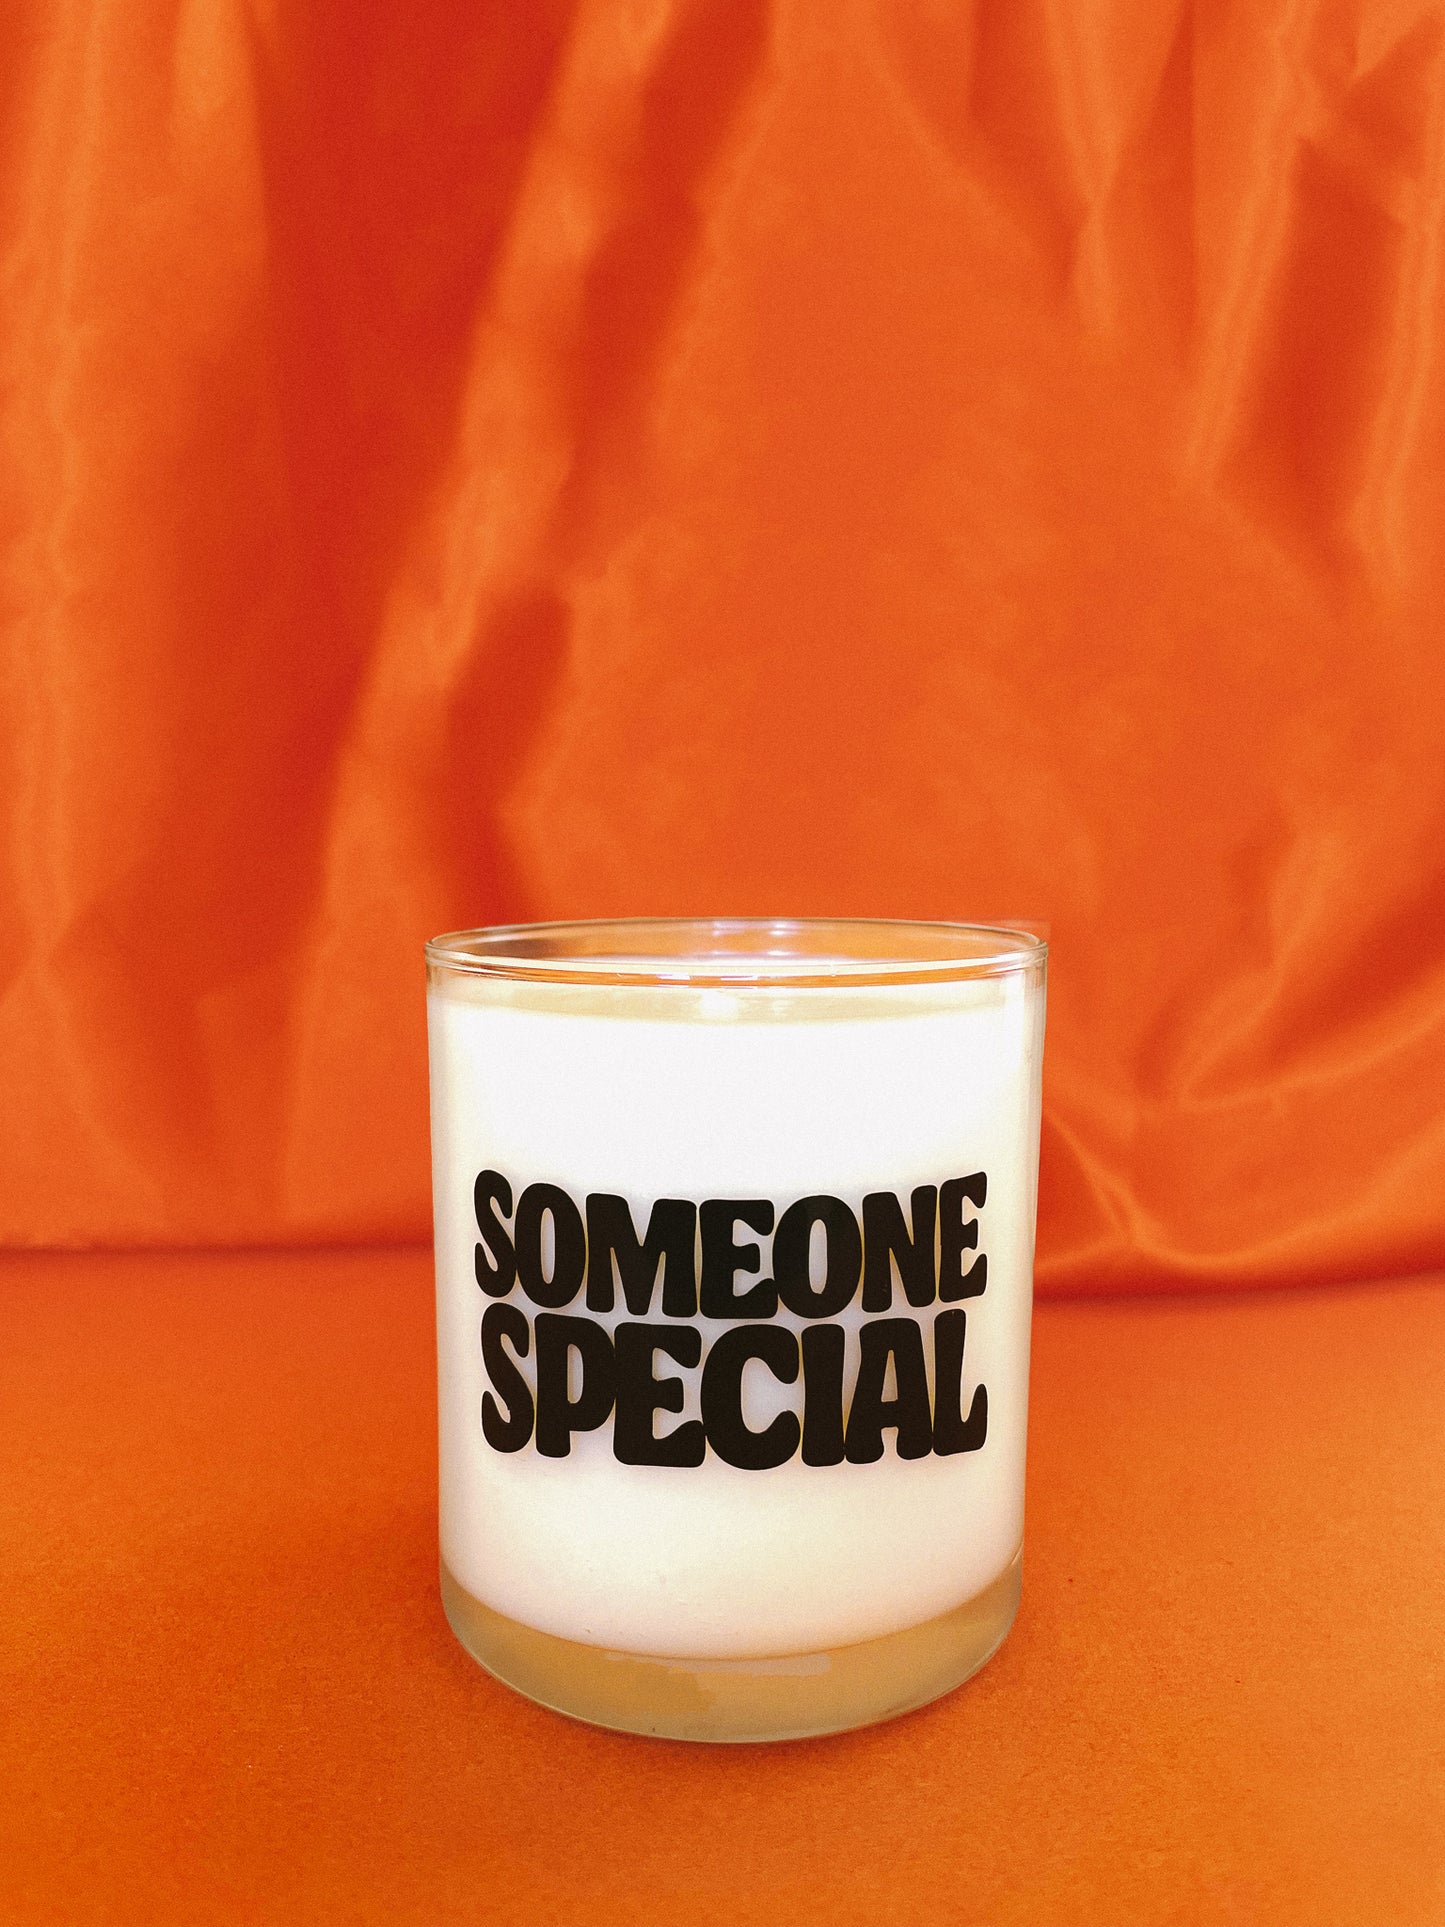 Someone Special candle